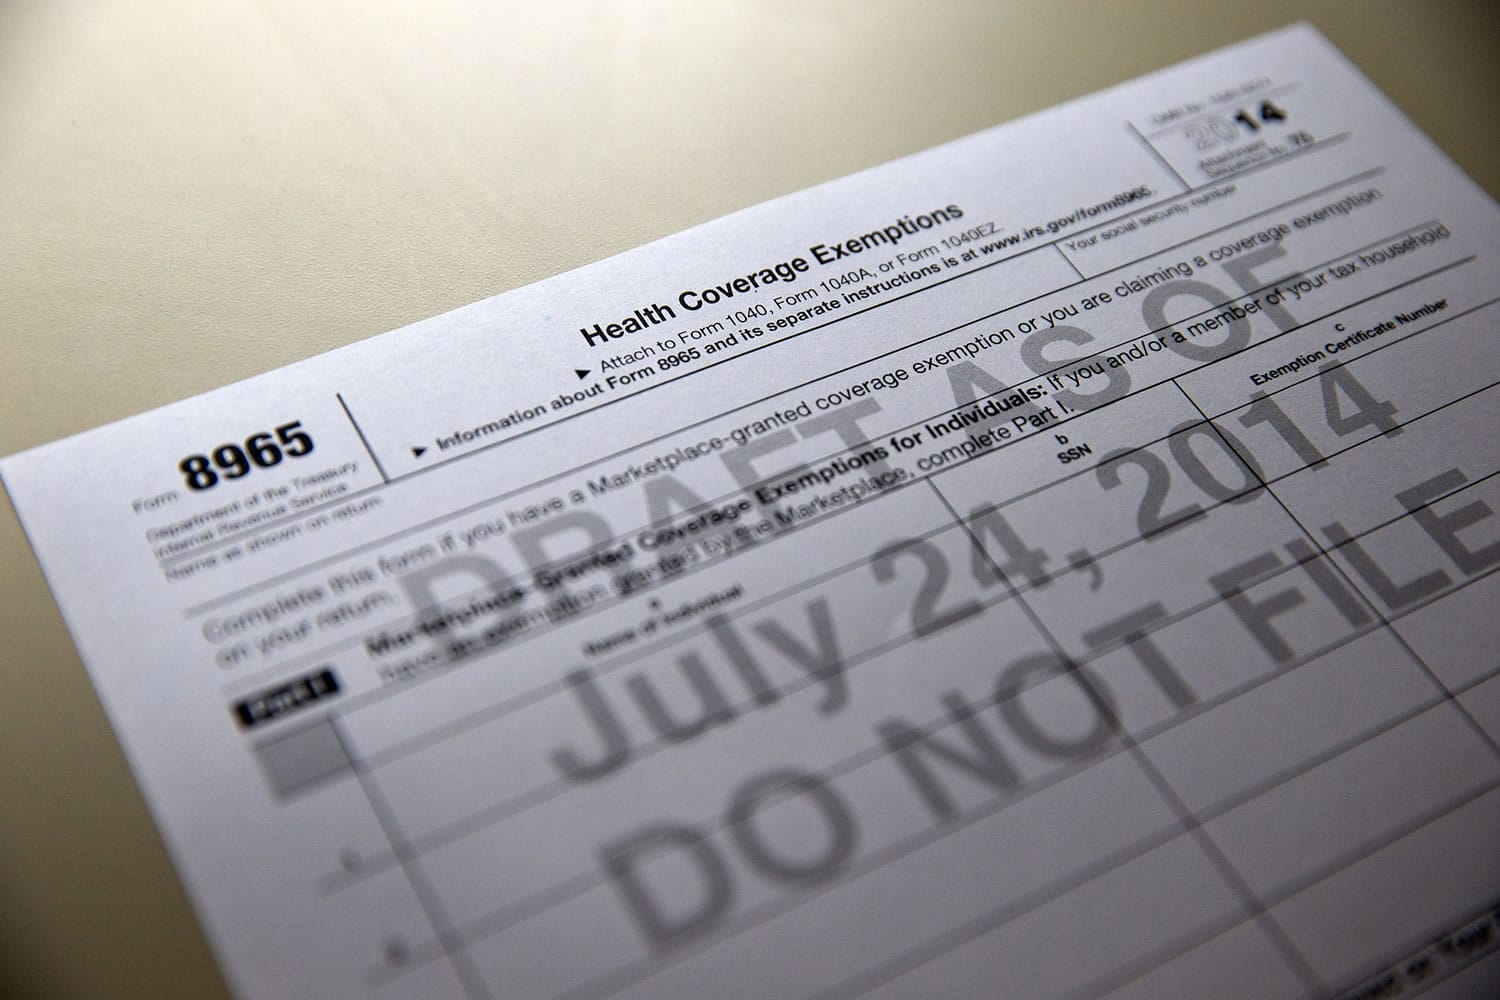 The IRS Health Coverage Exemption form